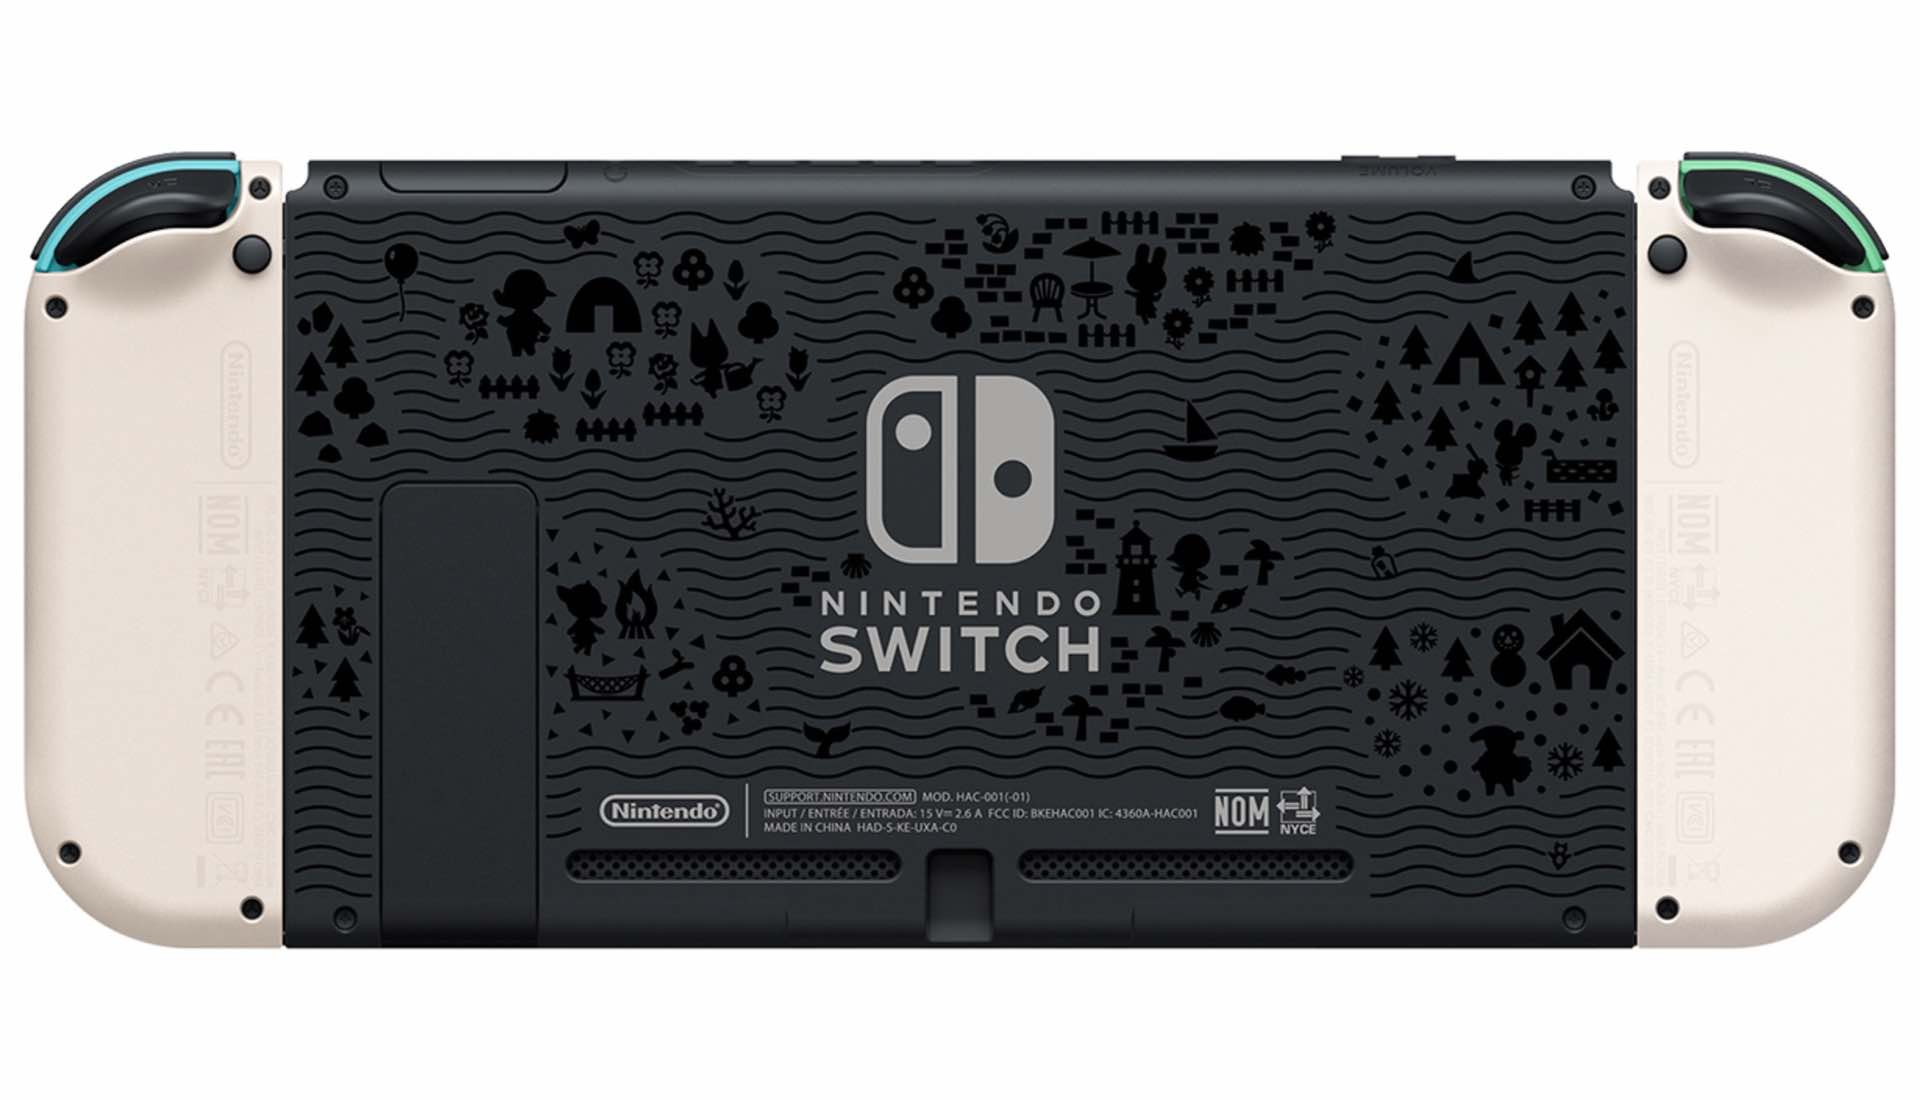 Nintendo Switch “Animal Crossing: New Horizons” Edition Back in